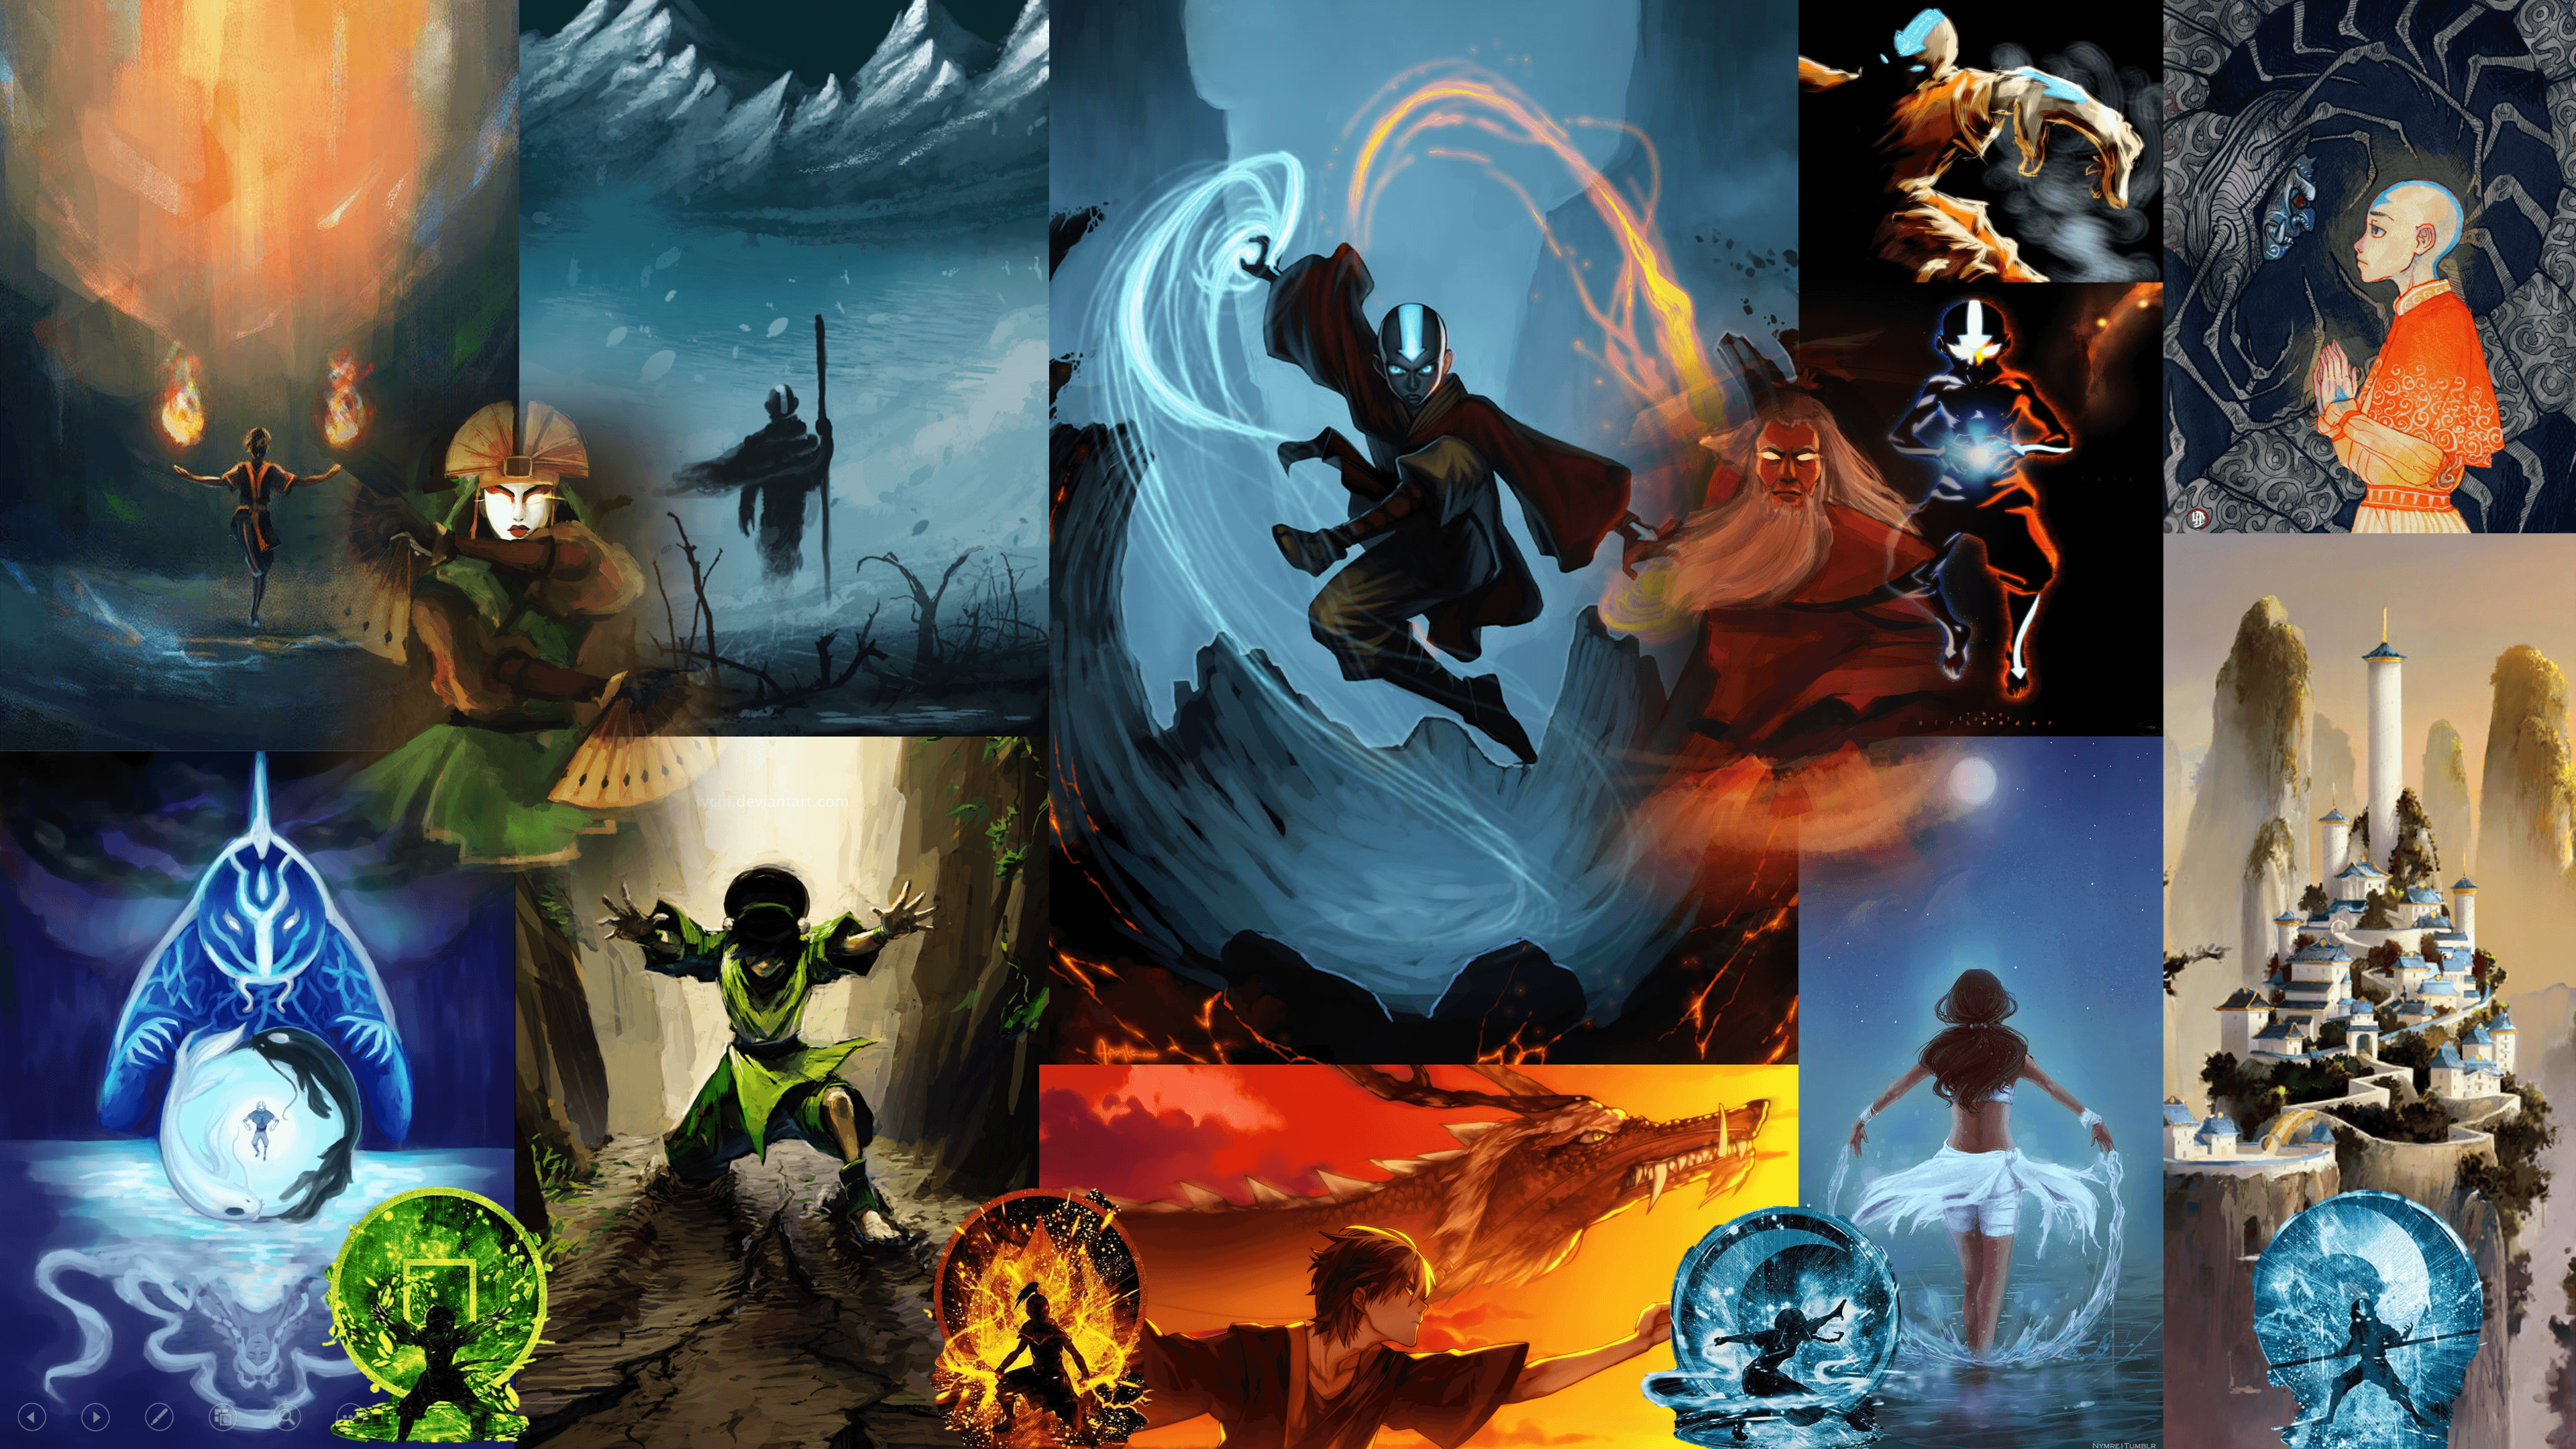 Avatar: The Last Airbender Wallpapers - Wallpaper Cave